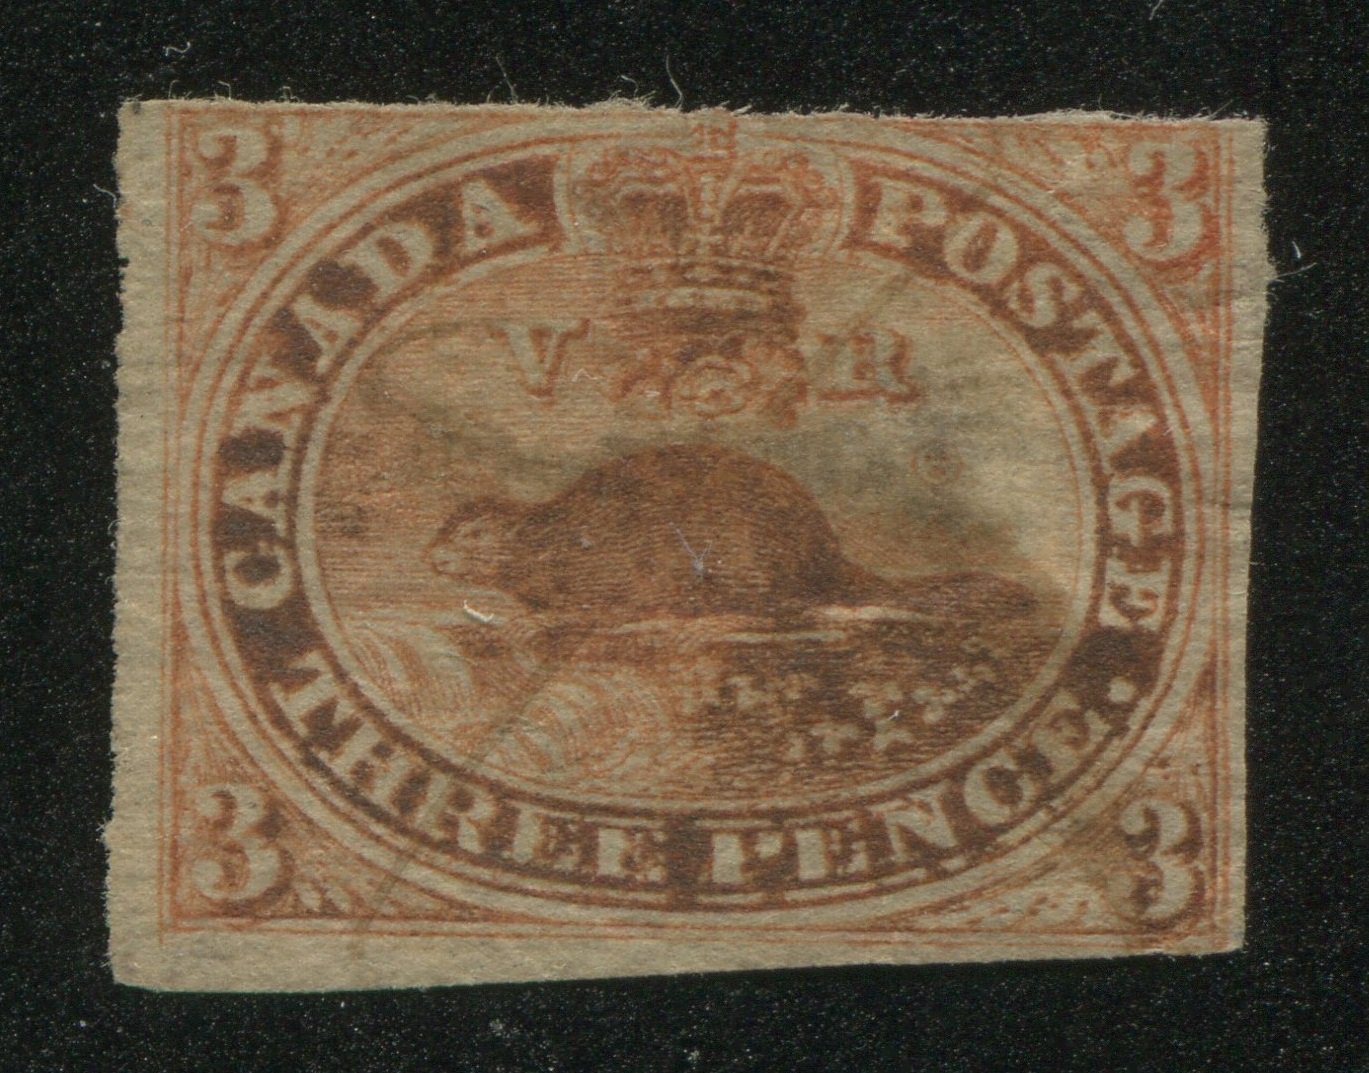 0004CA1709 - Canada #4d, vii - Used Major Re-Entry - Deveney Stamps Ltd. Canadian Stamps